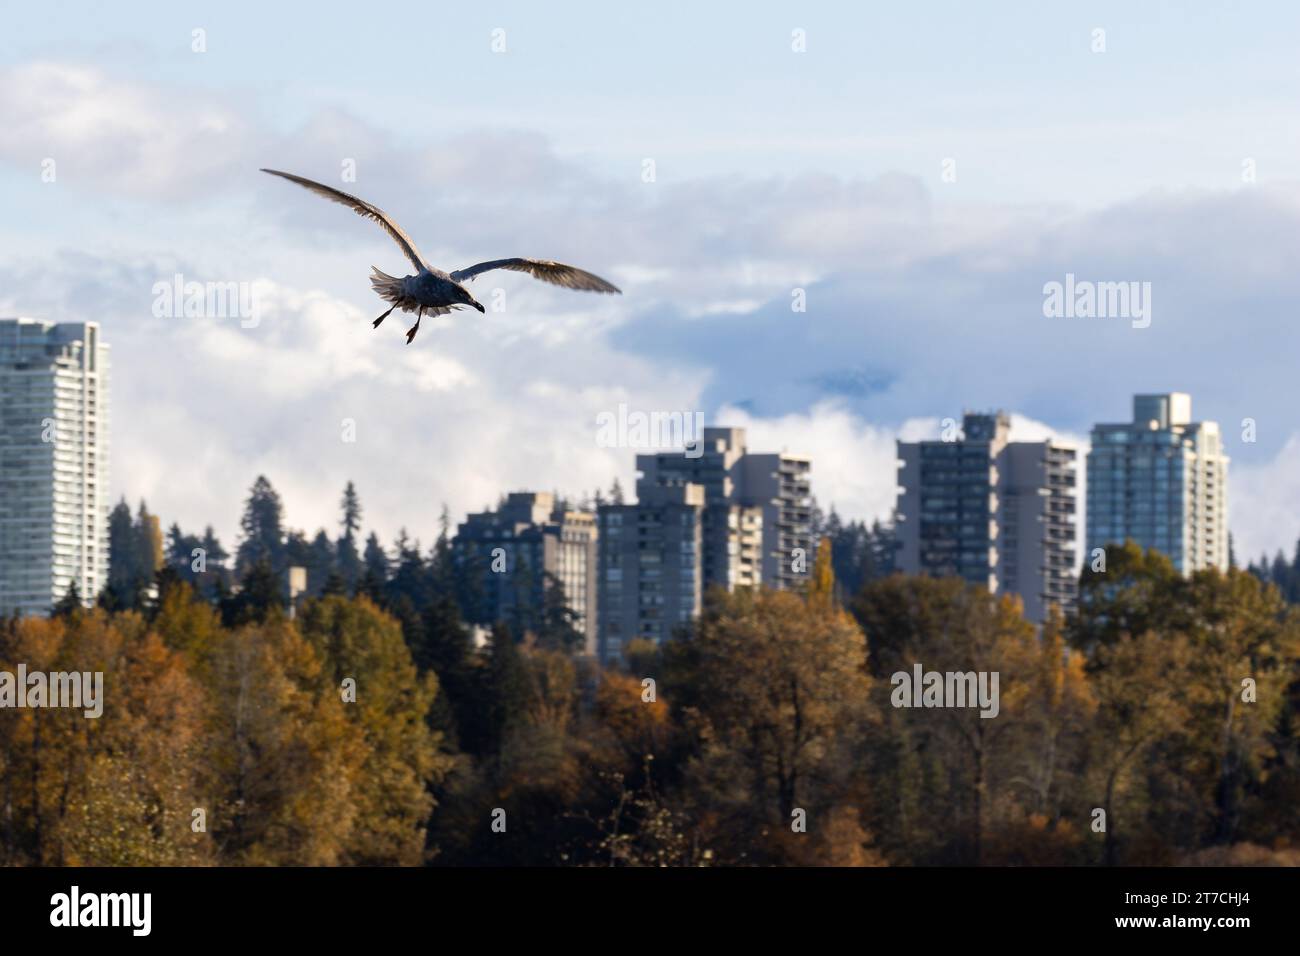 A juvenile seagull soaring over Burnaby Lake with some residential buildings in the background in Burnaby, BC, Canada. Stock Photo